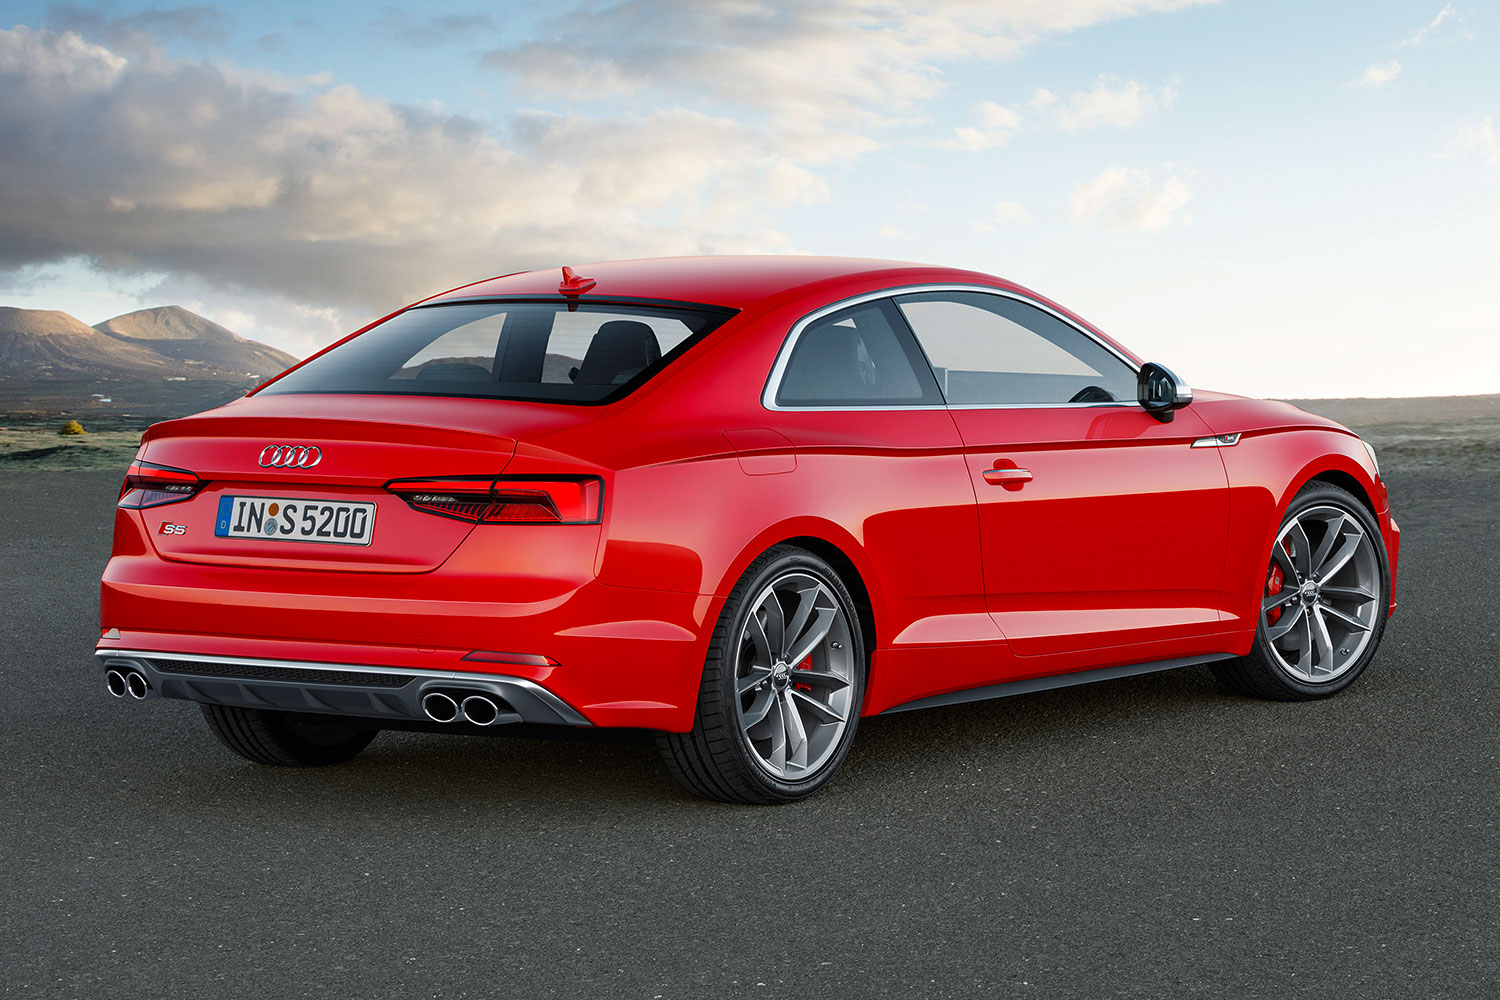 2017 audi a5 news pictures specs performance s5 coupe 009